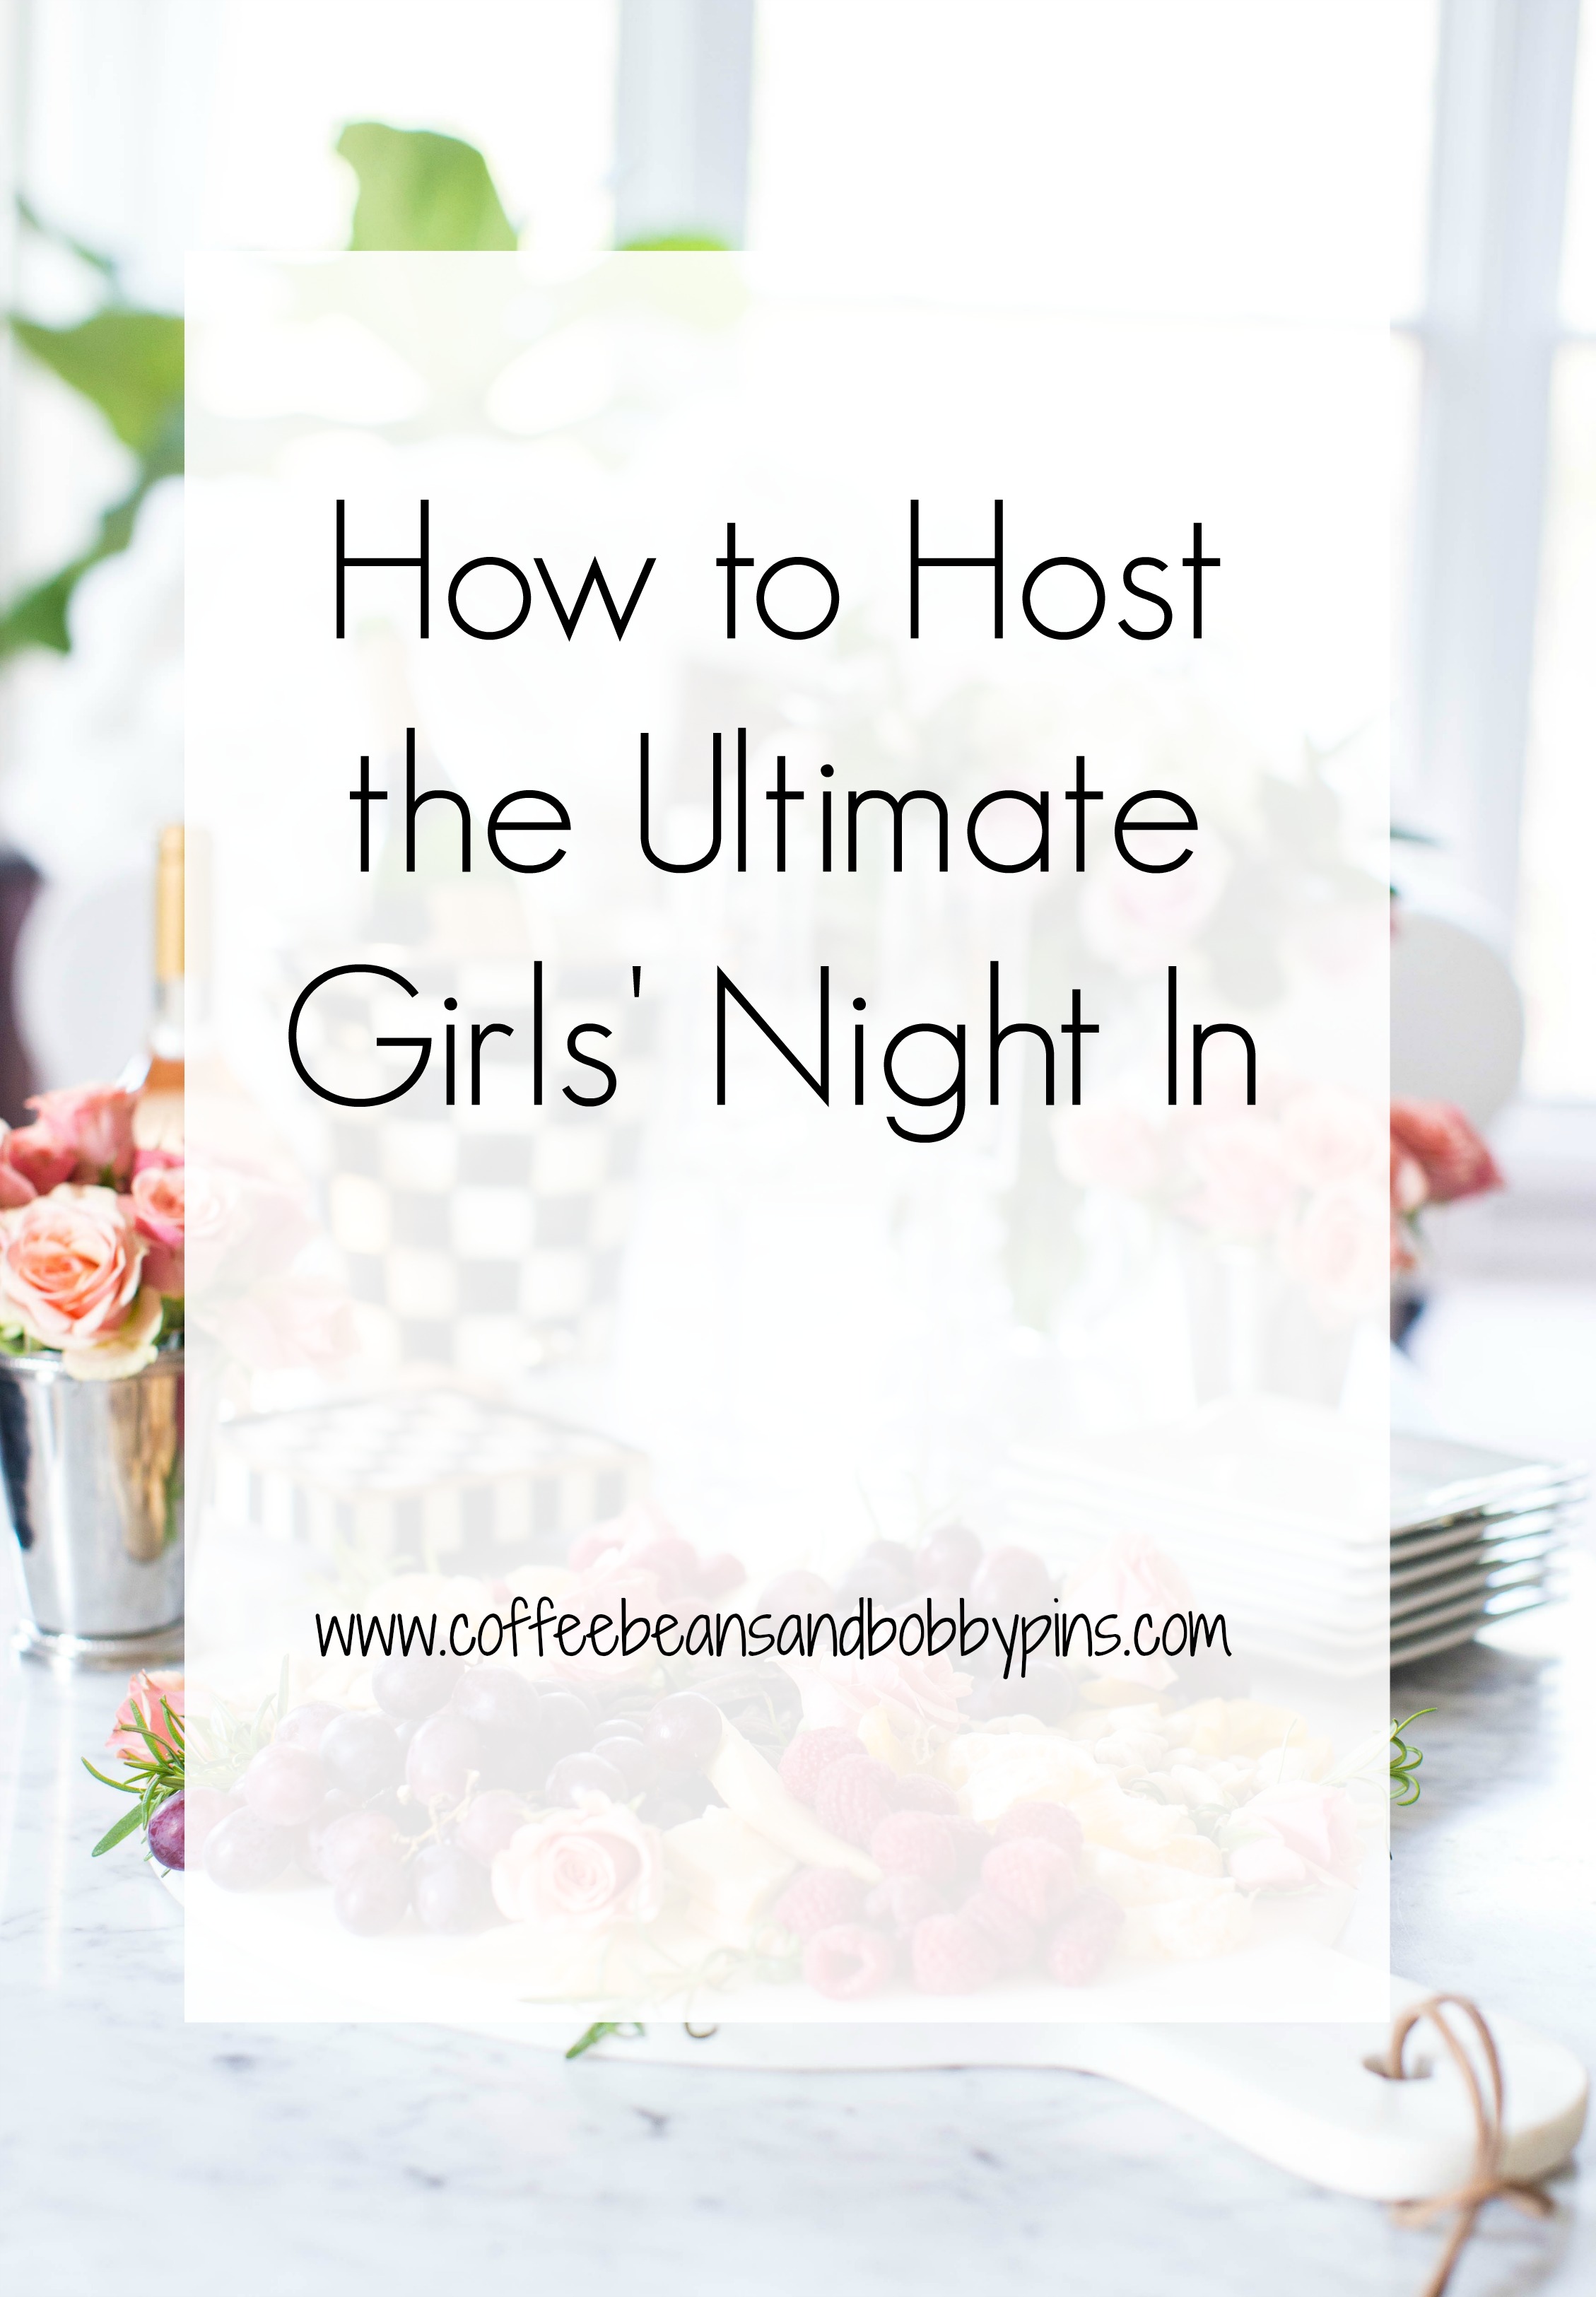 How to Host the Ultimate Girls Night In by popular North Carolina lifestyle blogger Coffee Beans and Bobby Pins